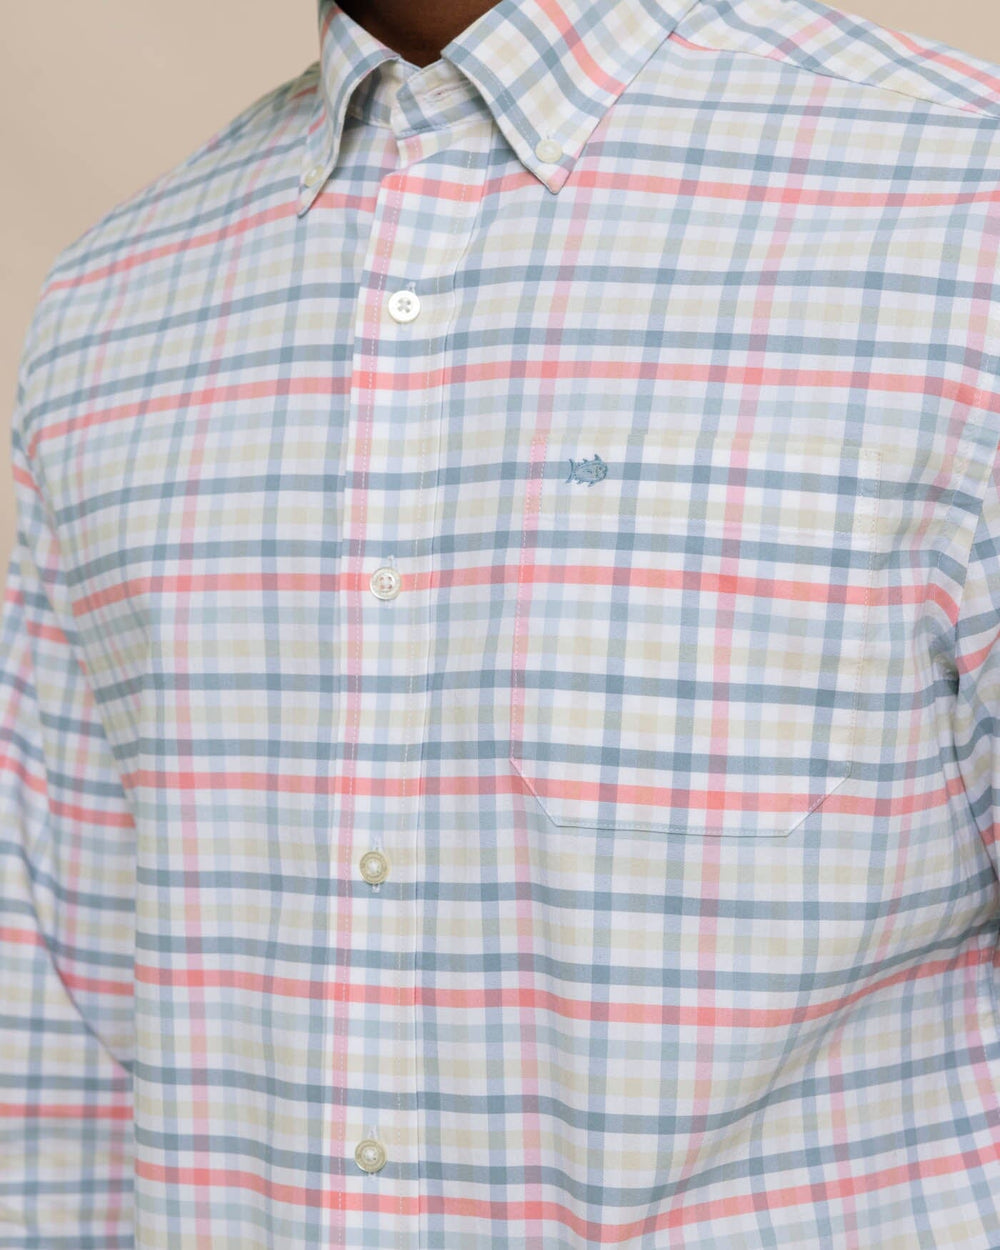 The detail view of the Southern Tide Coastal Passage Pelham Gingham Long Sleeve Sport Shirt by Southern Tide - Geranium Pink